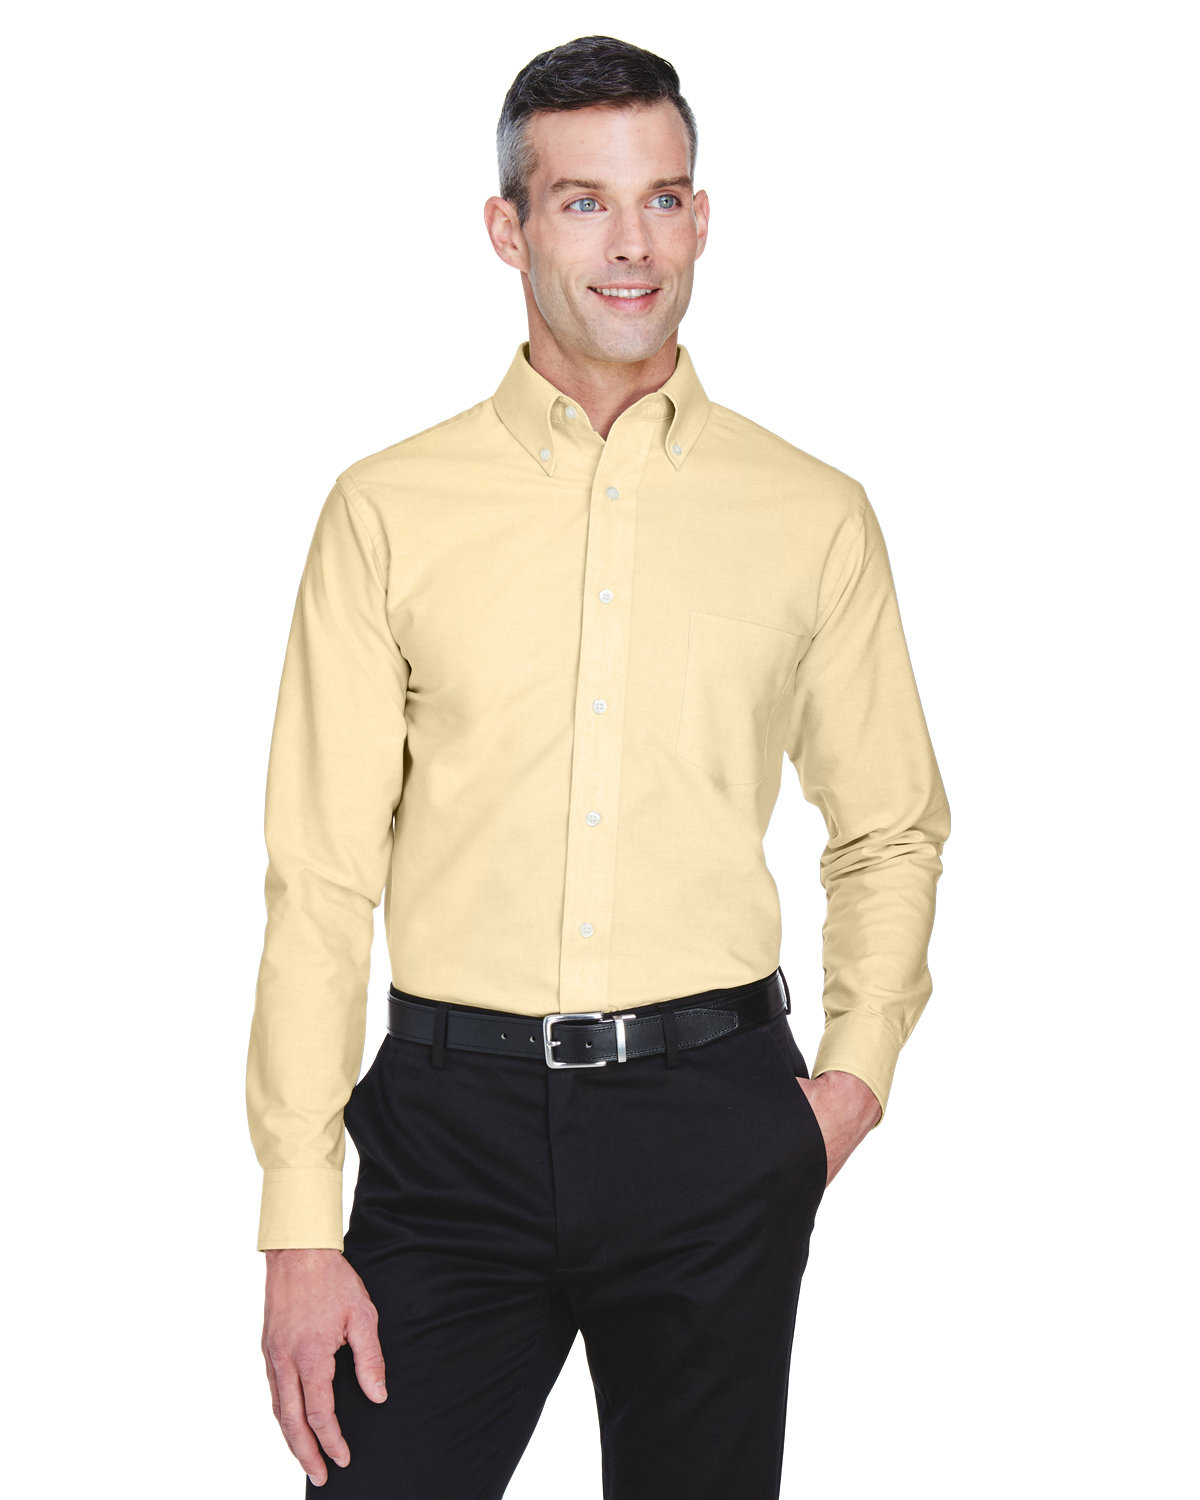 UltraClub Men's Classic Wrinkle-Resistant Long-Sleeve Oxford BUTTER 